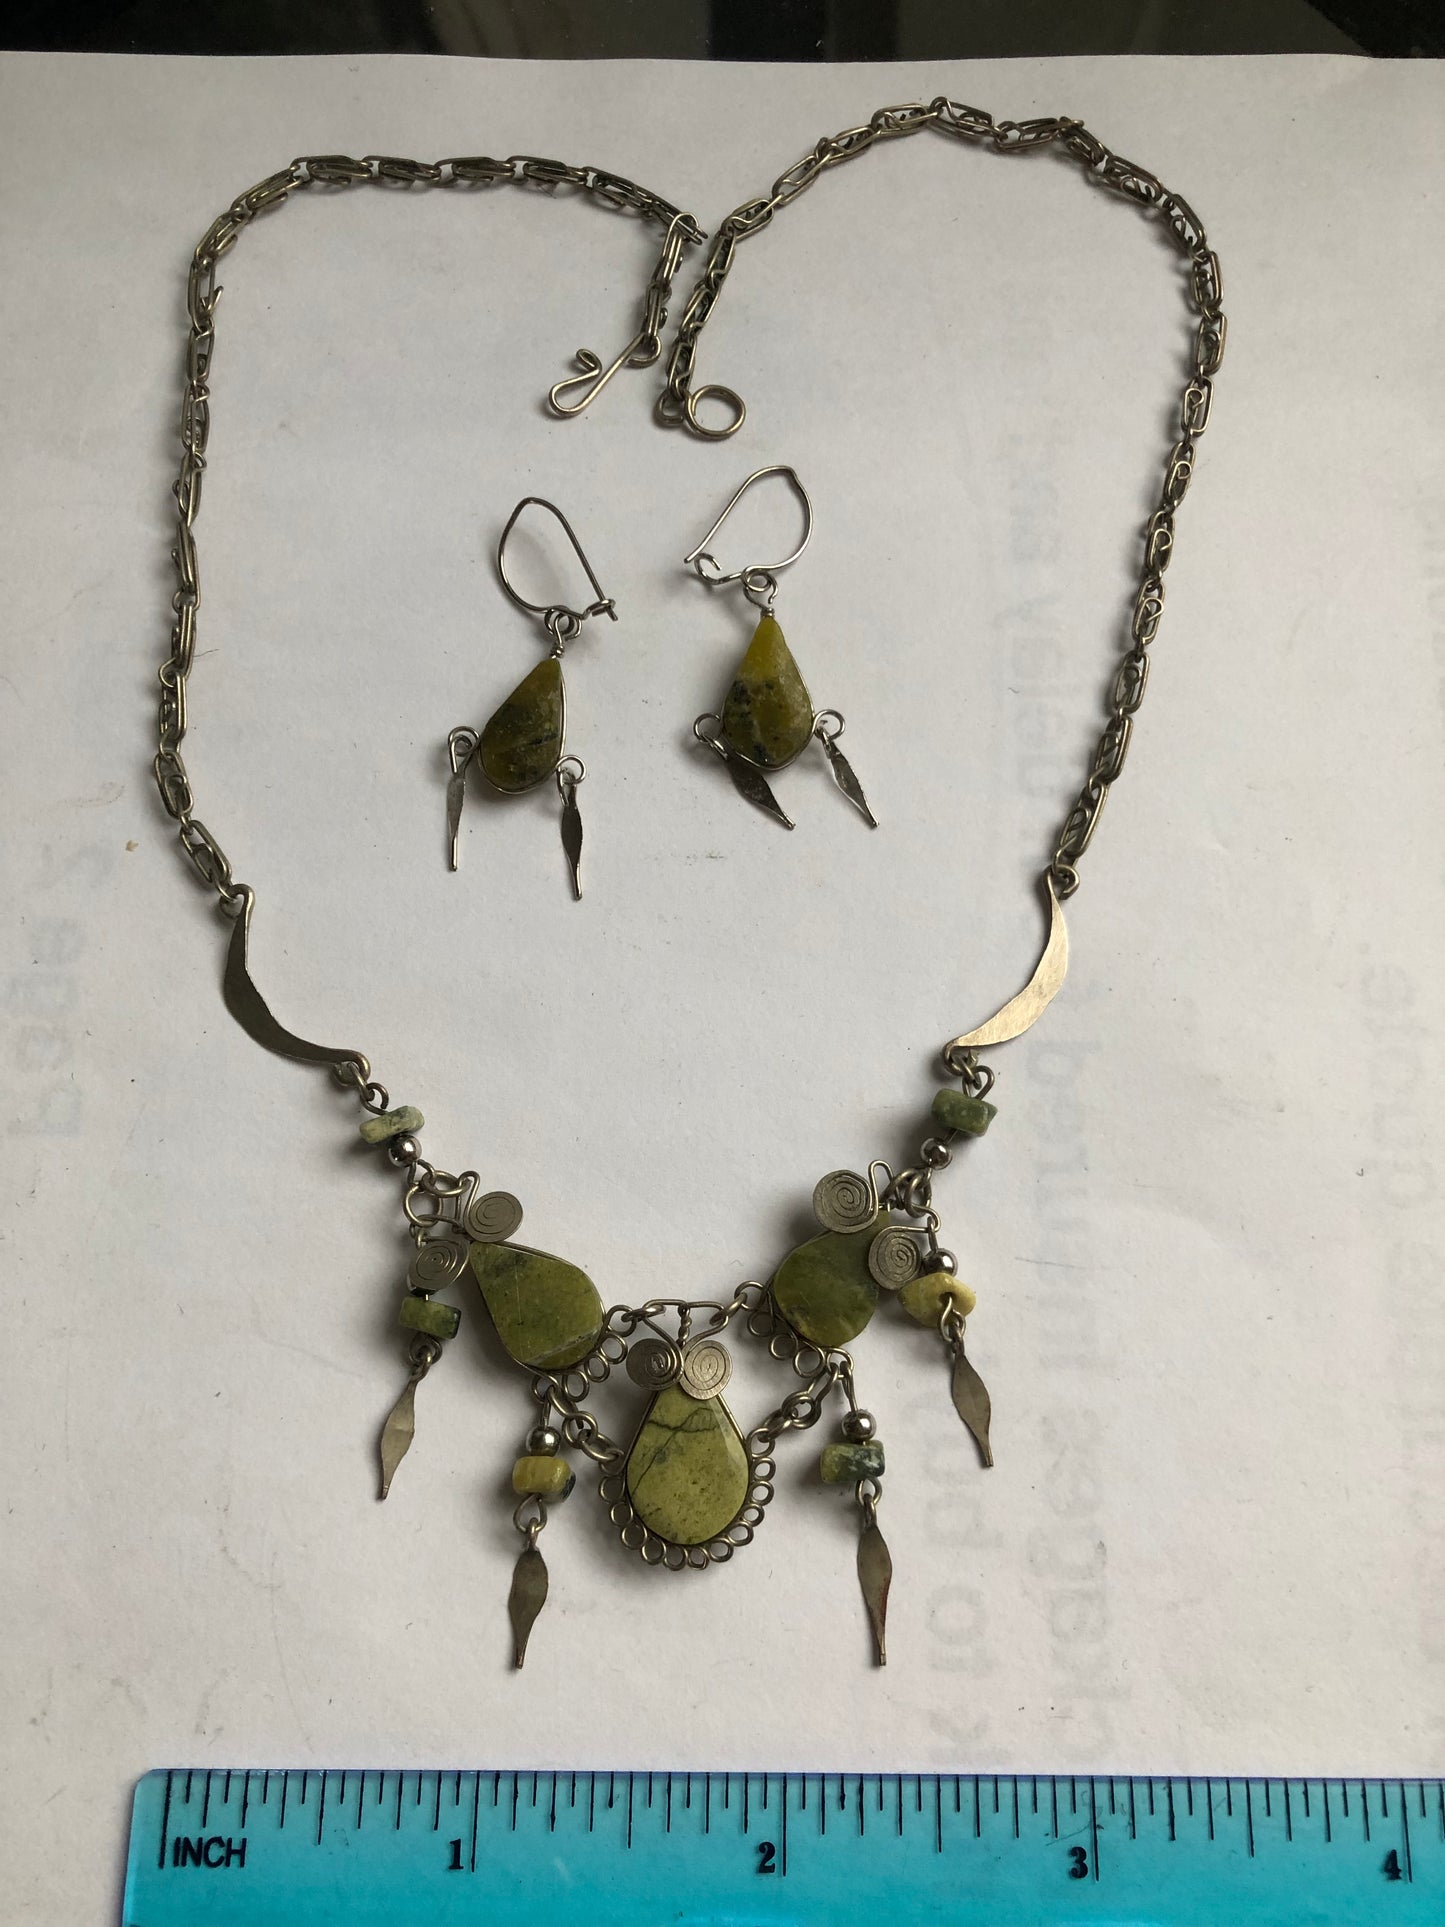 Handmade necklace earrings set green stone silver tone wire